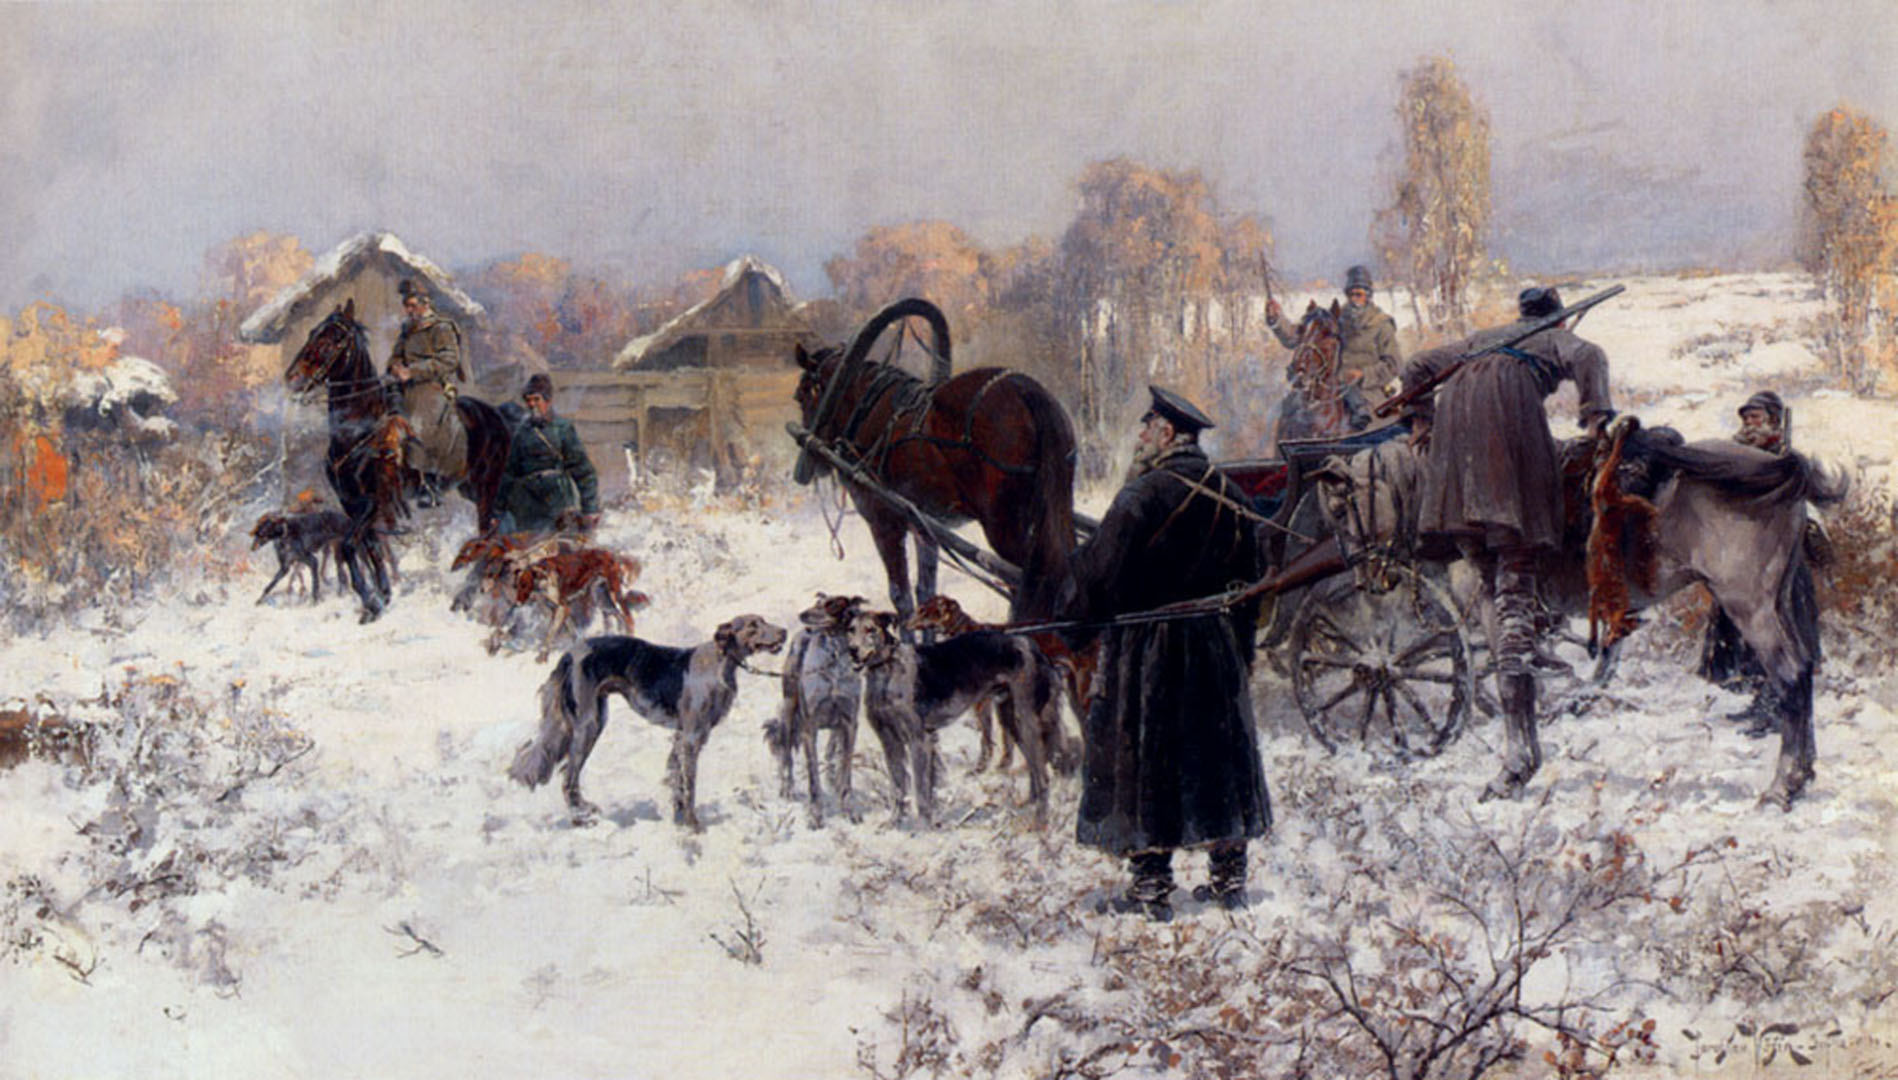 Dogs Horses And Carts In The Snow Russian Art Wallpaper Image